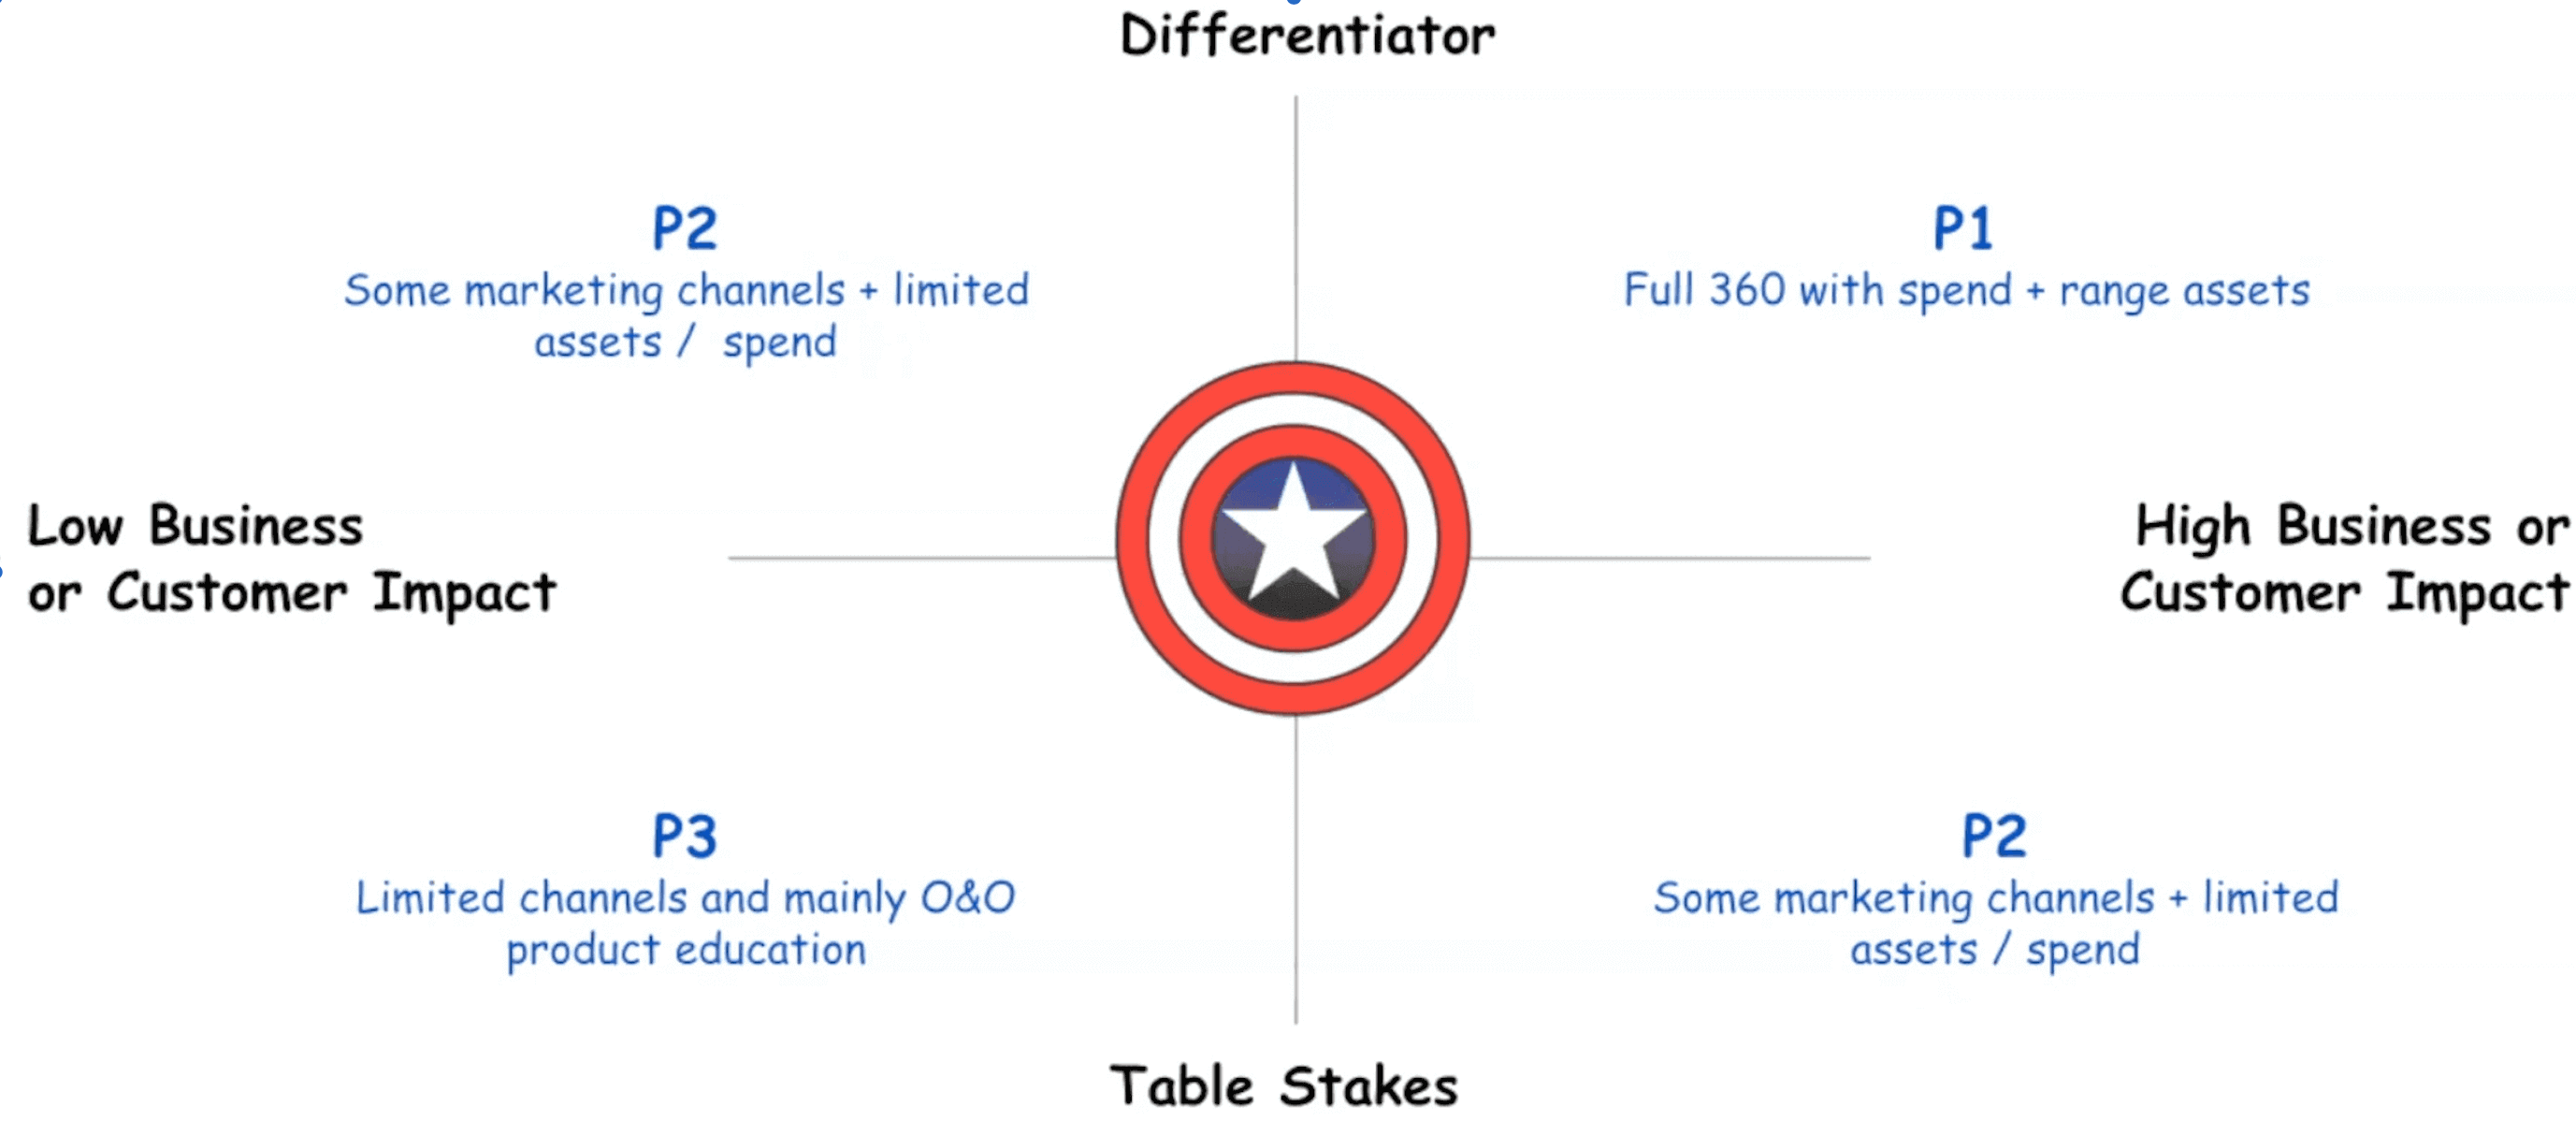 This is a graph with the Captain America shield in the middle, on the Y Axis it is labelled "Differentiator" at the top and "Table Stakes" at the bottom. On the X Axis, it is labelled "Low Business or Customer Impact" on the left and "High Business or Customer Impact" on the right. On the top right of the graph, in between Differentiator and High Business or Customer Impact, it says P1. P2 is between High Business or Customer Impact and Table Stakes and also between Differentator and Low Business or Customer Impact. P3 is between Low Business or Customer Impact and Table Stakes. 